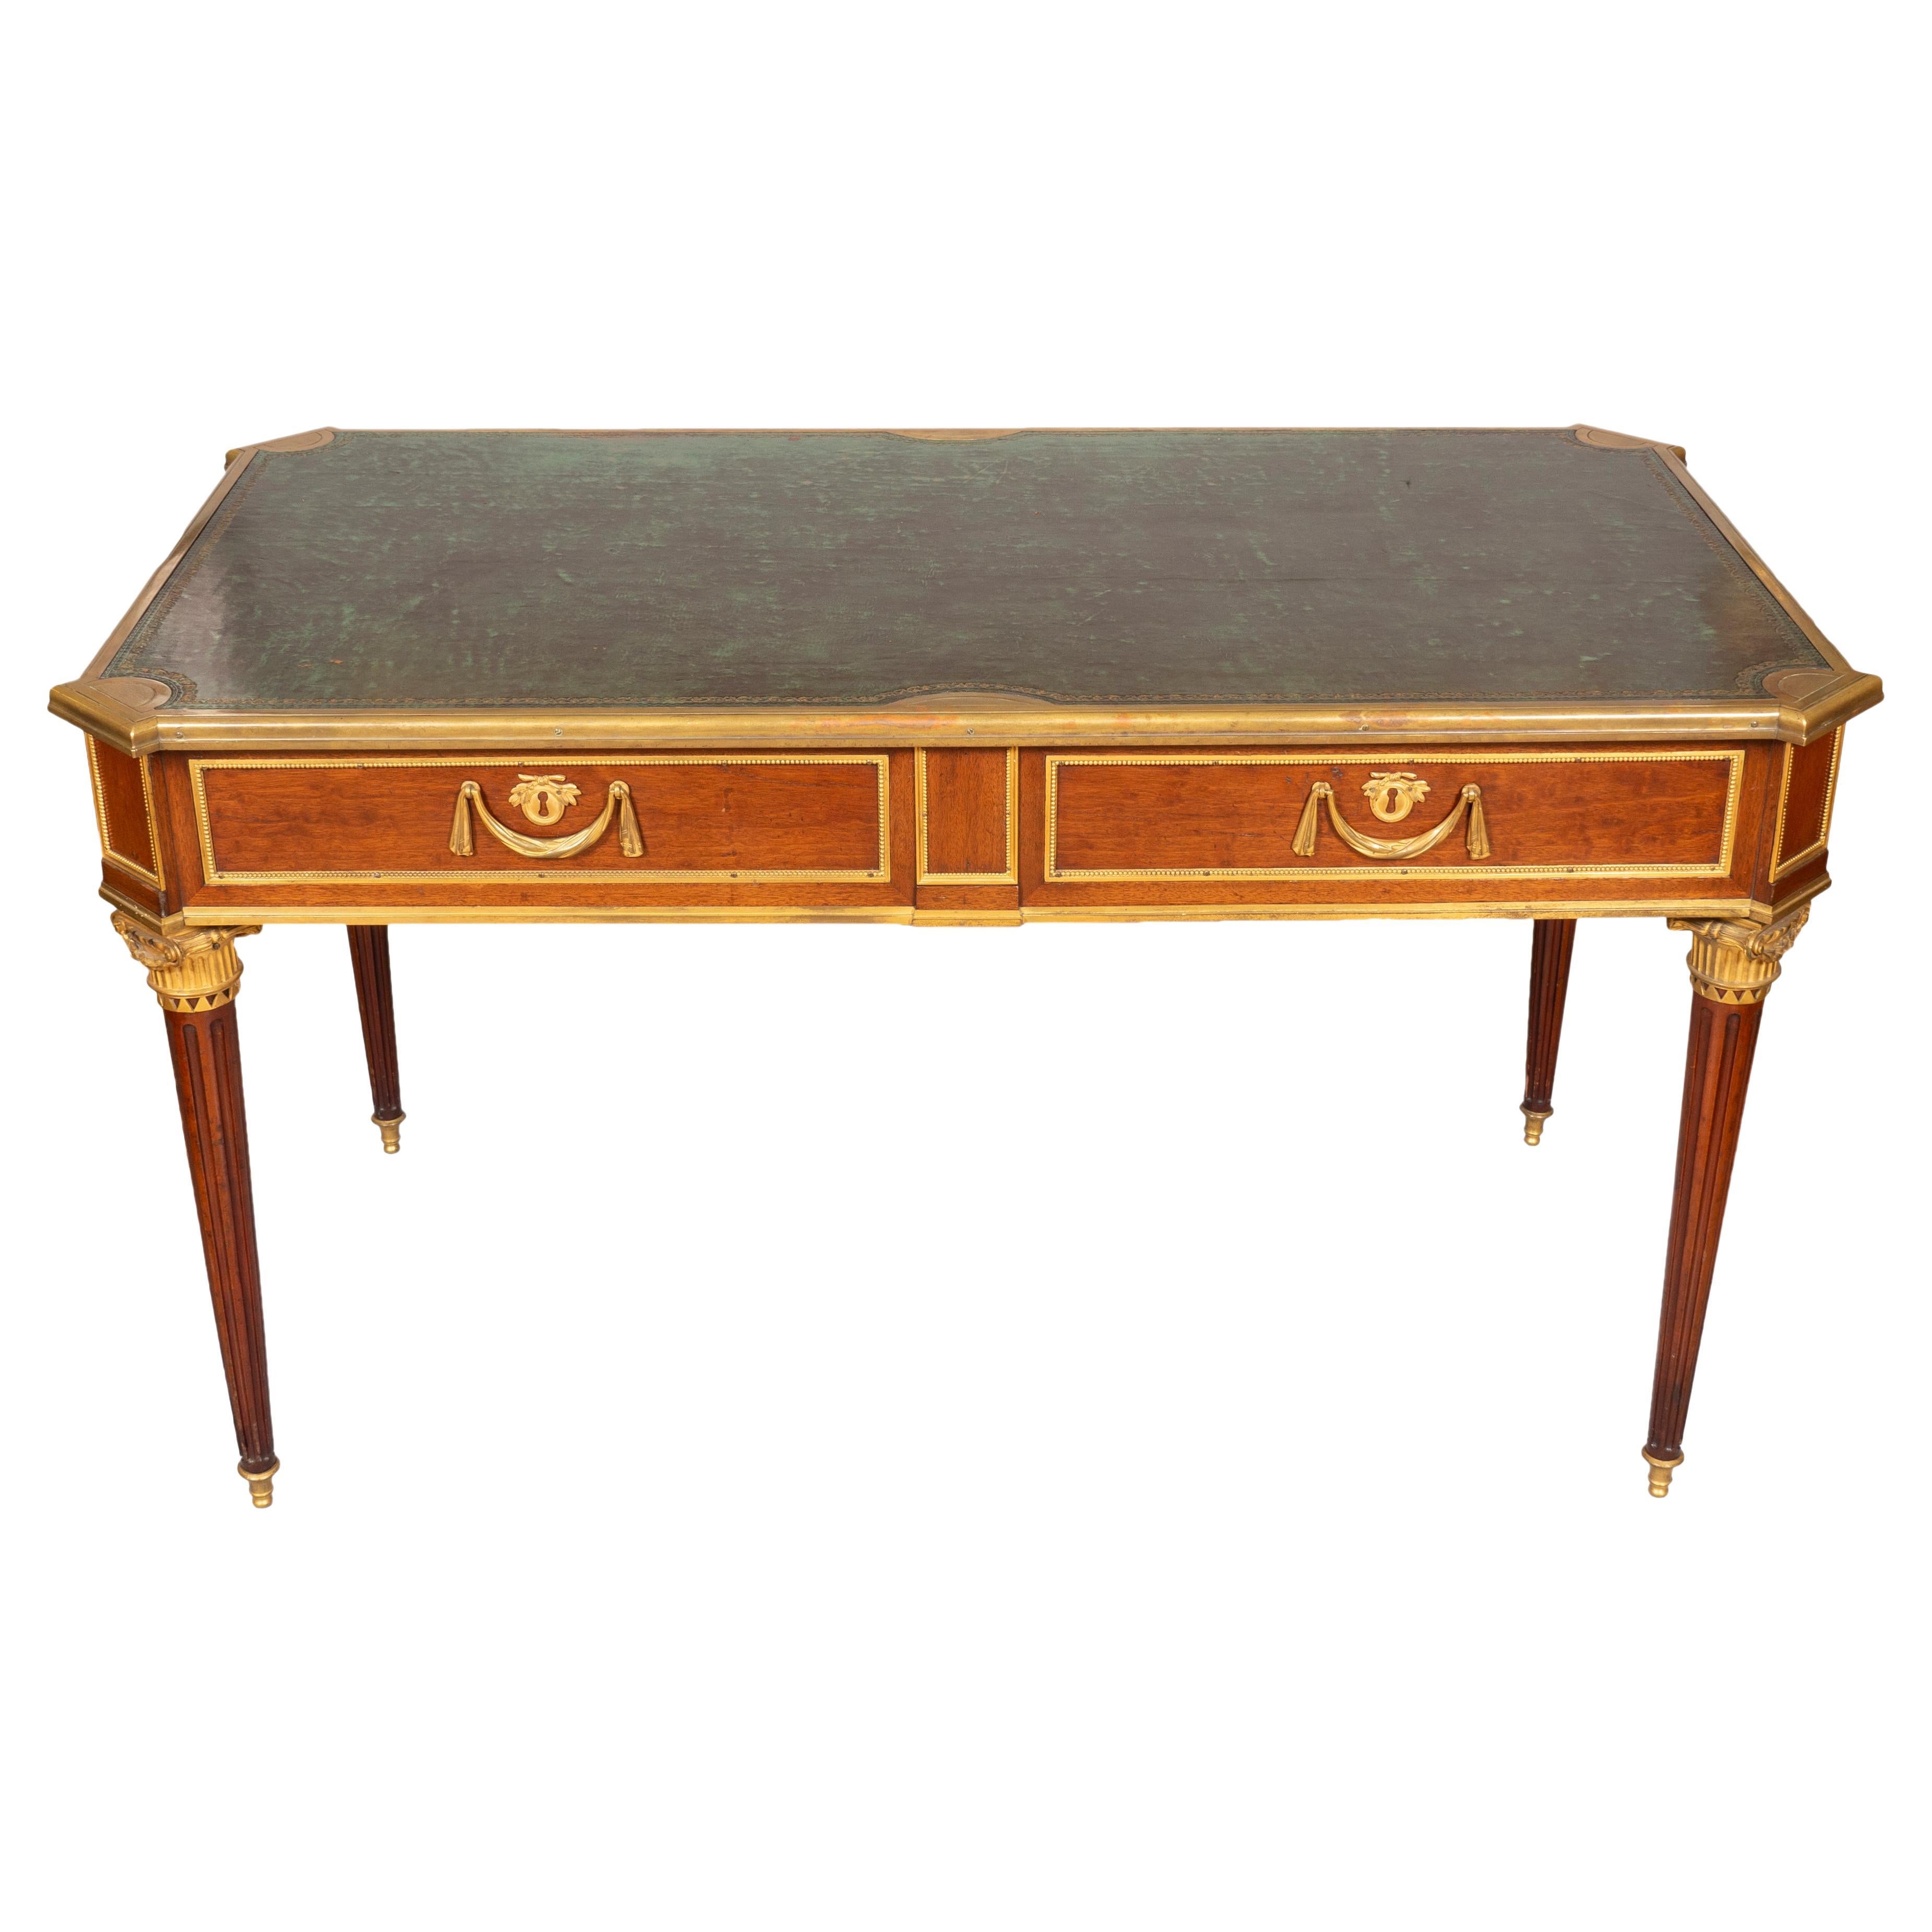 This desk is by one of the finest makers in France during the fourth quarter of the 18th century under the reign of Louis XVI.
Stamped M.CARLIN and JME on underside. Two commodes by Carlin with identical handles are illustrated in Le Mobilier